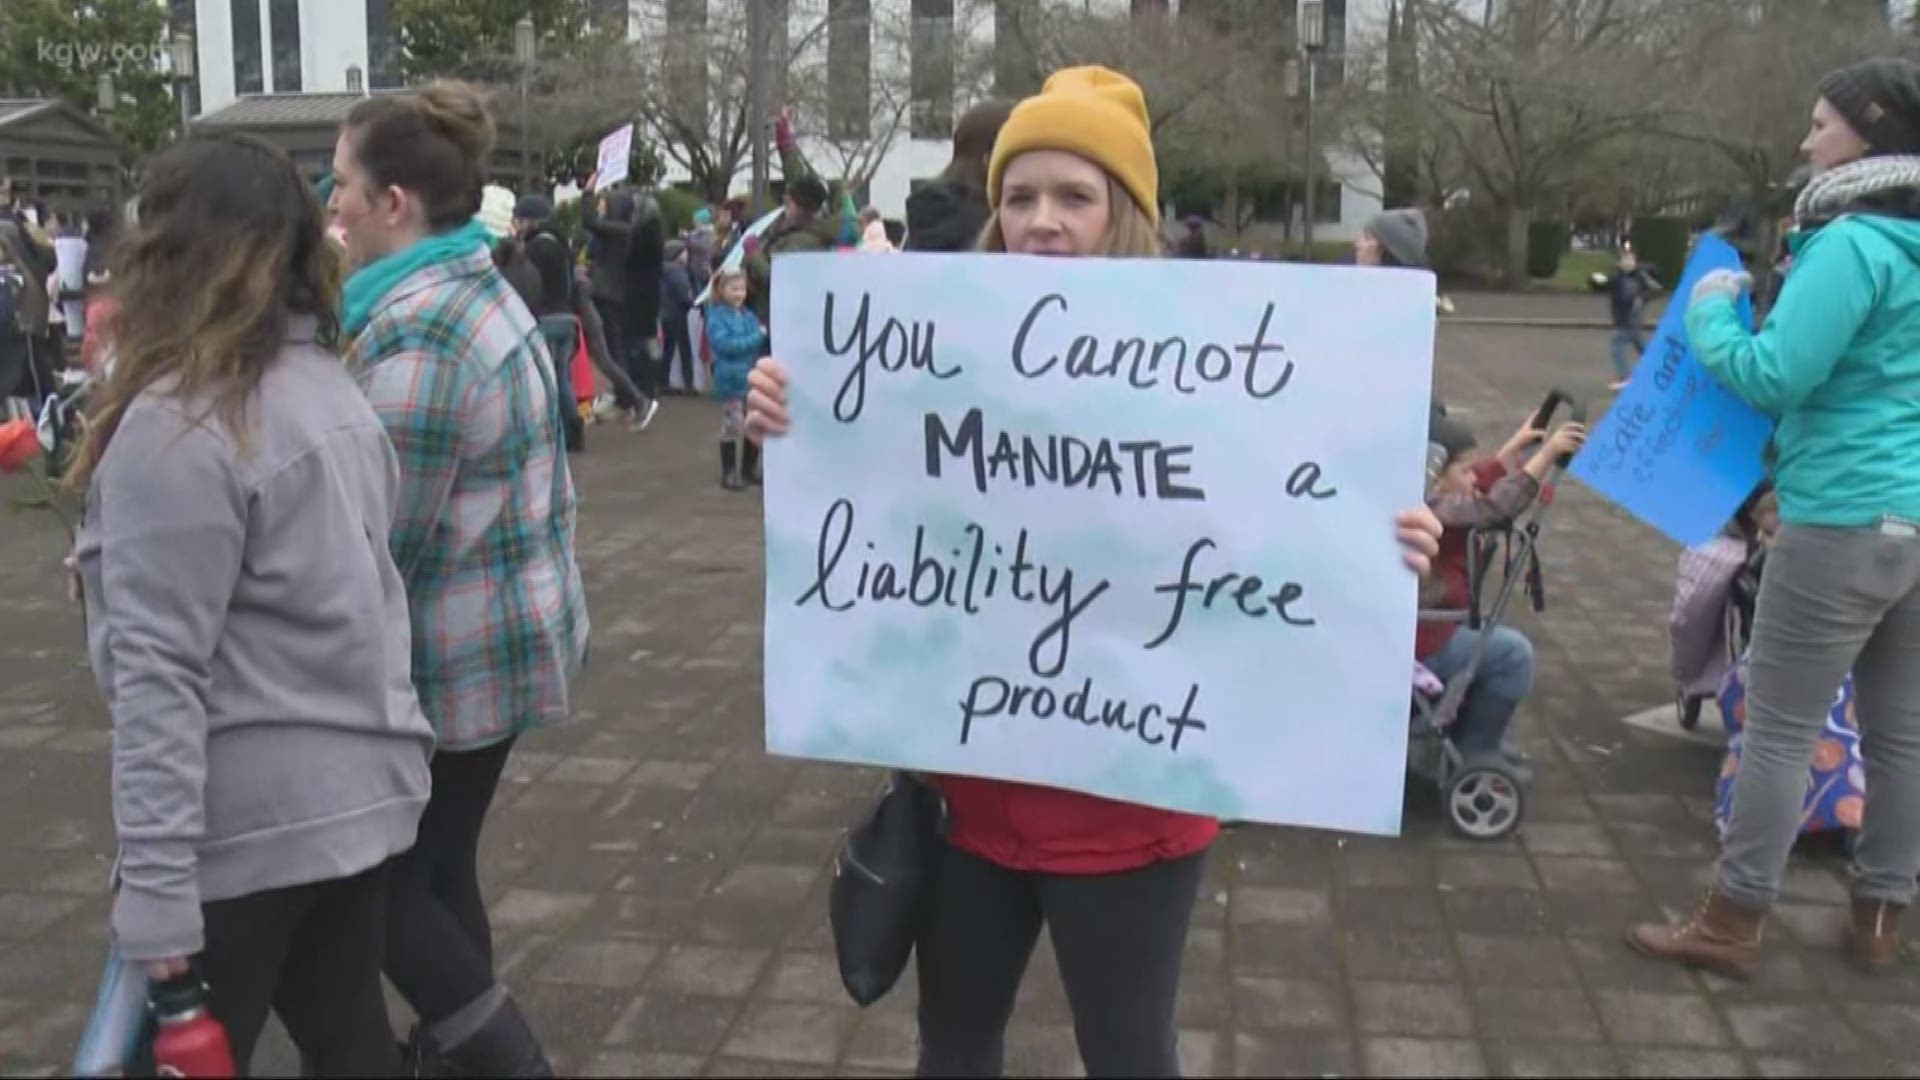 Opponents of a vaccine exemption bill rallied in Salem at the Capitol